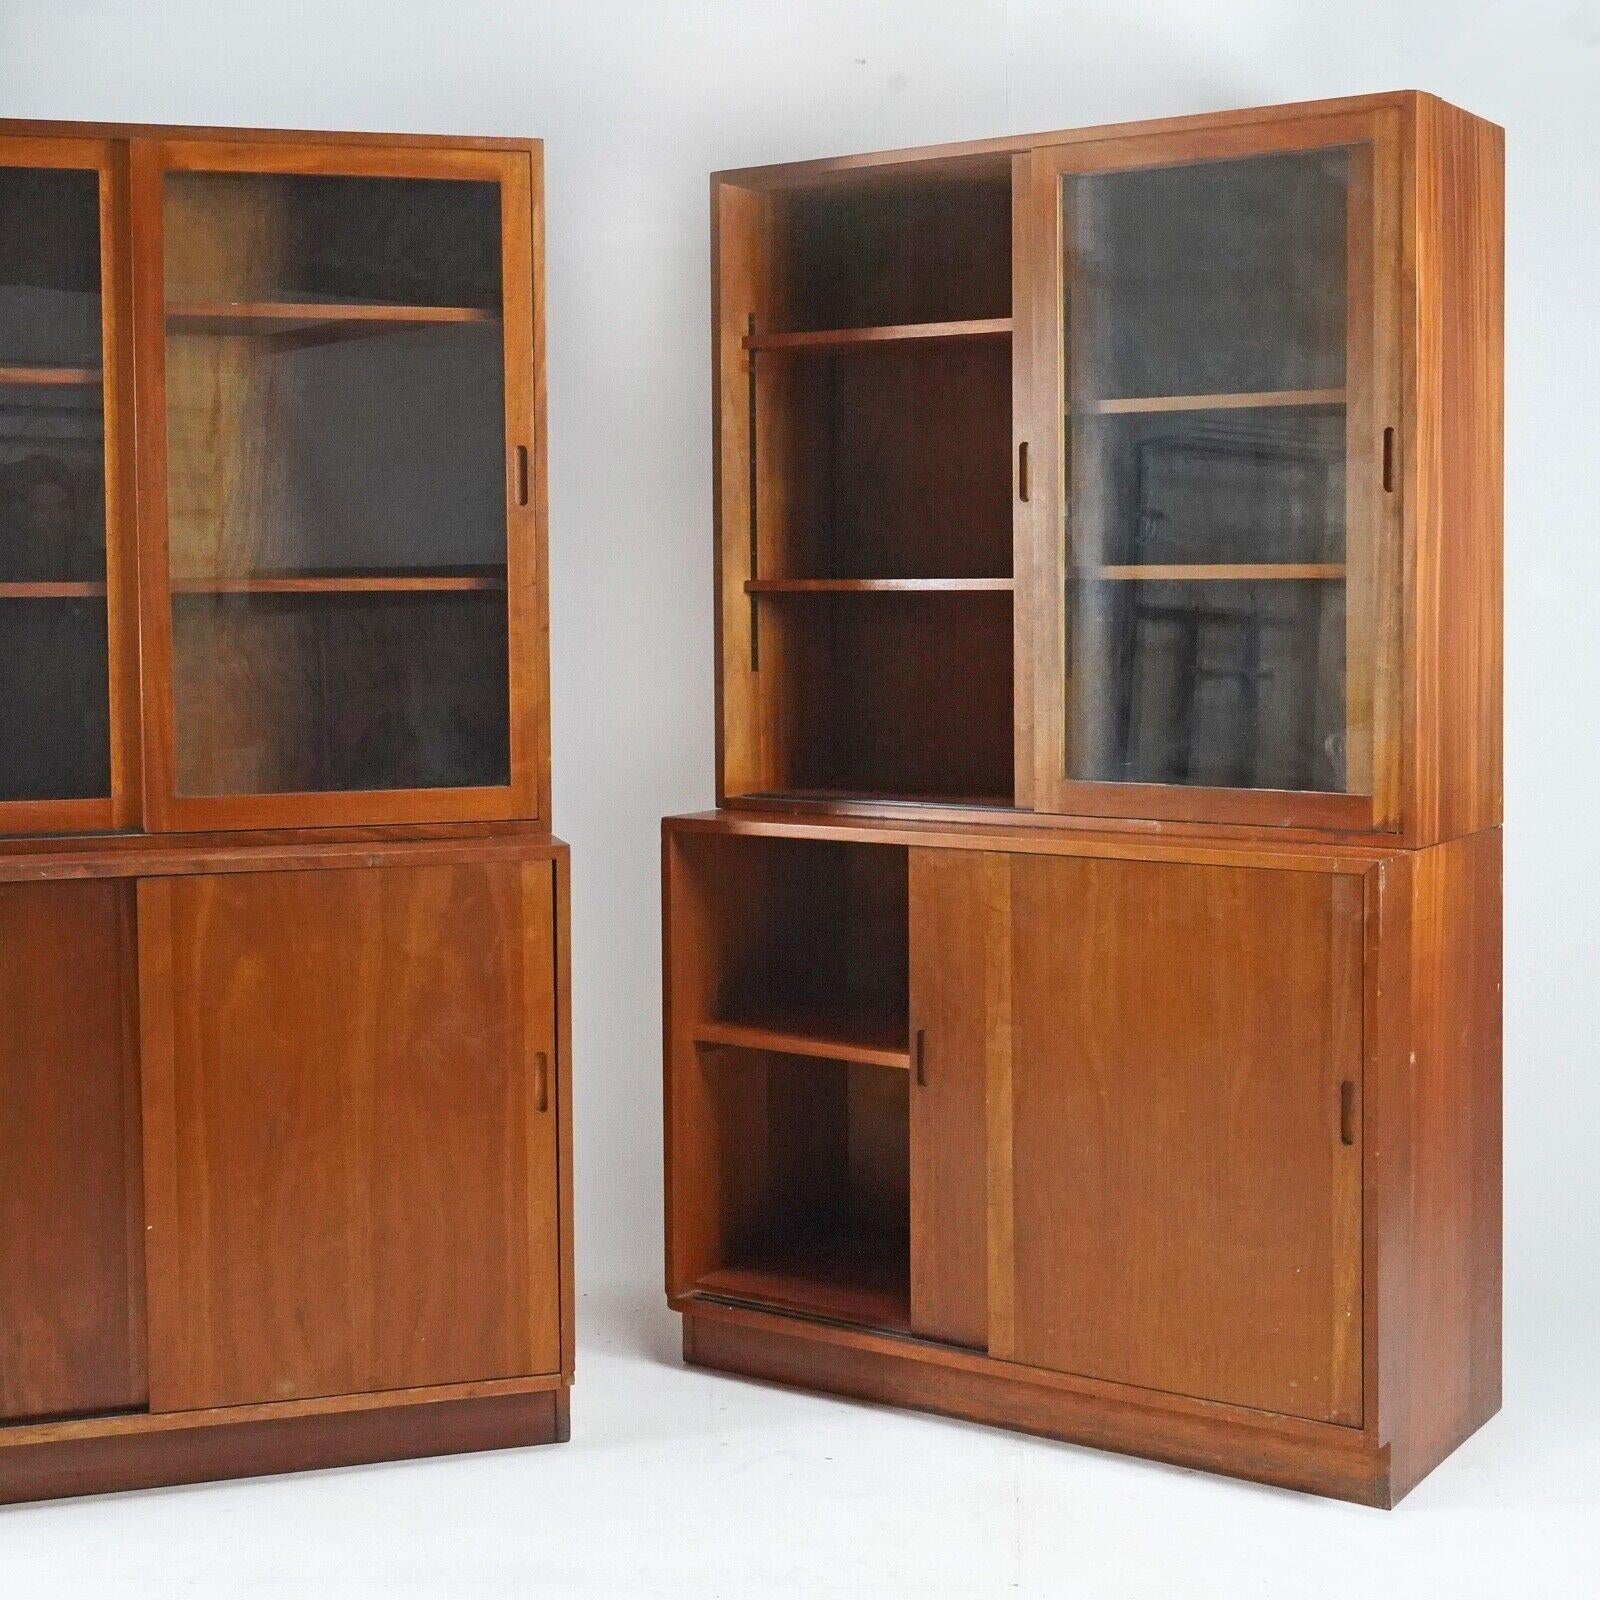 A fantastic free-standing solid teak display cabinet from the 1950's
This piece offers so much storage and would look fantastic in a sitting room or dining room - showcasing all your favourite items. The cupboard has sliding glazed doors on top